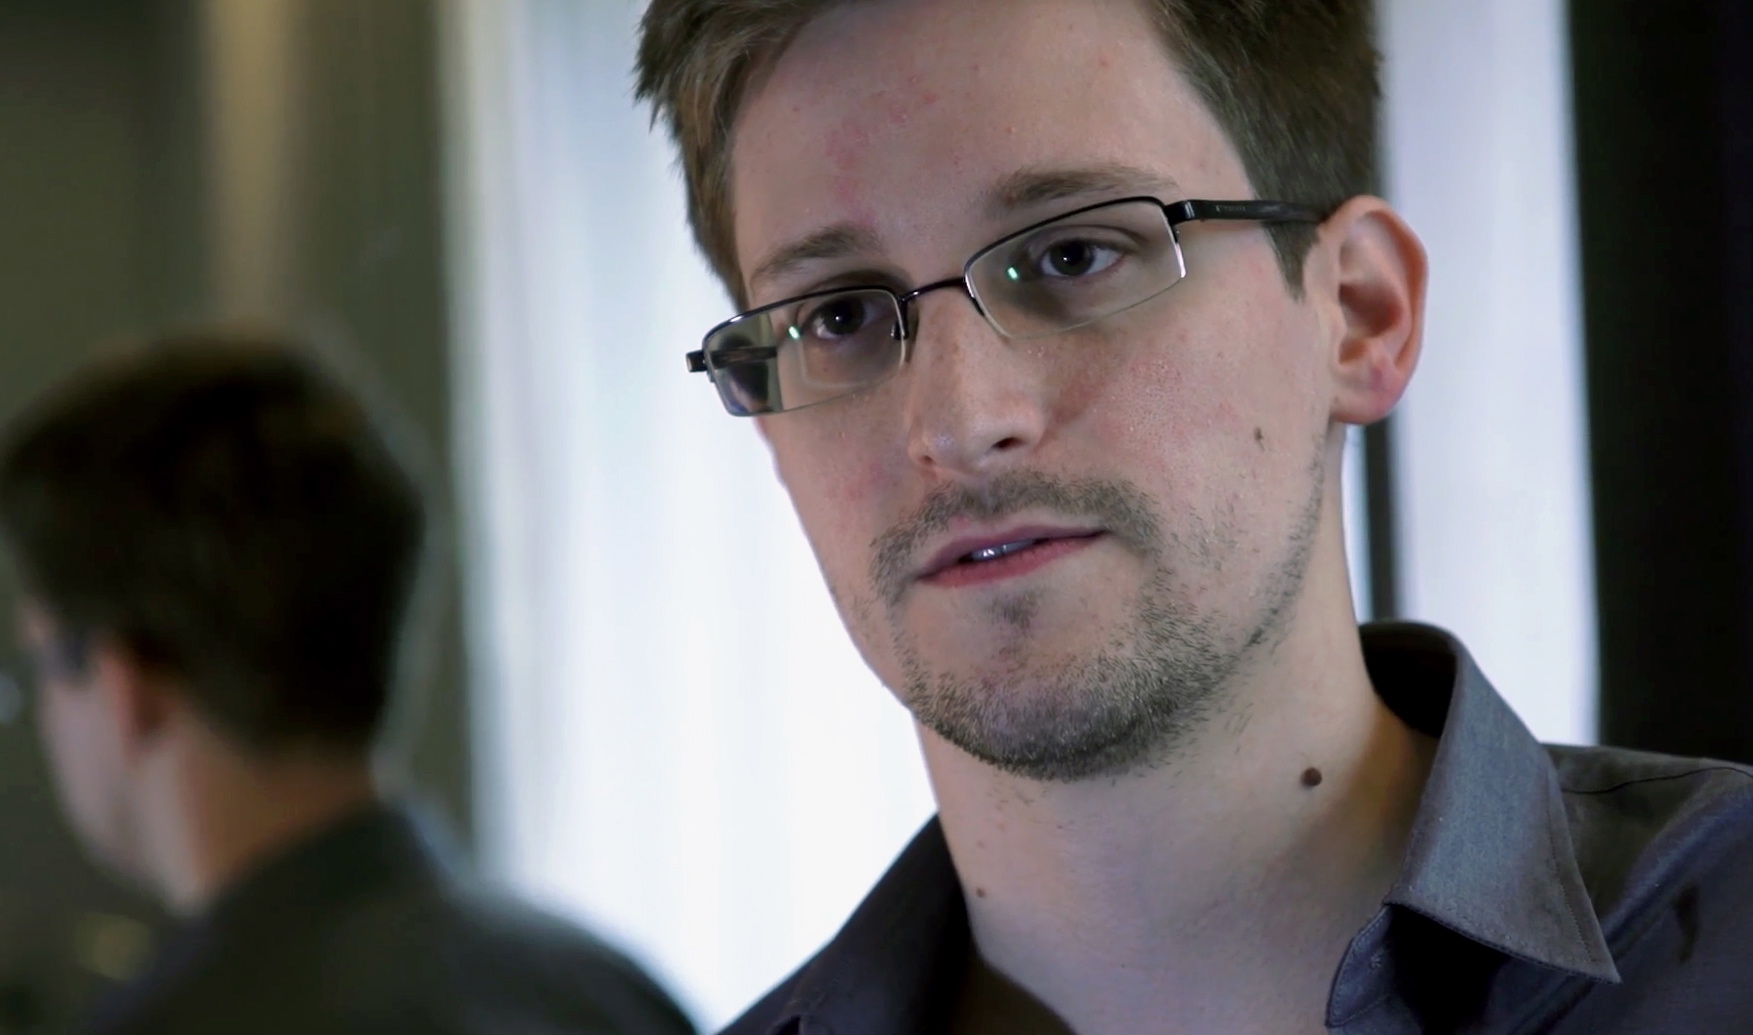 Edward Snowden worked as a contract employee at the U.S.